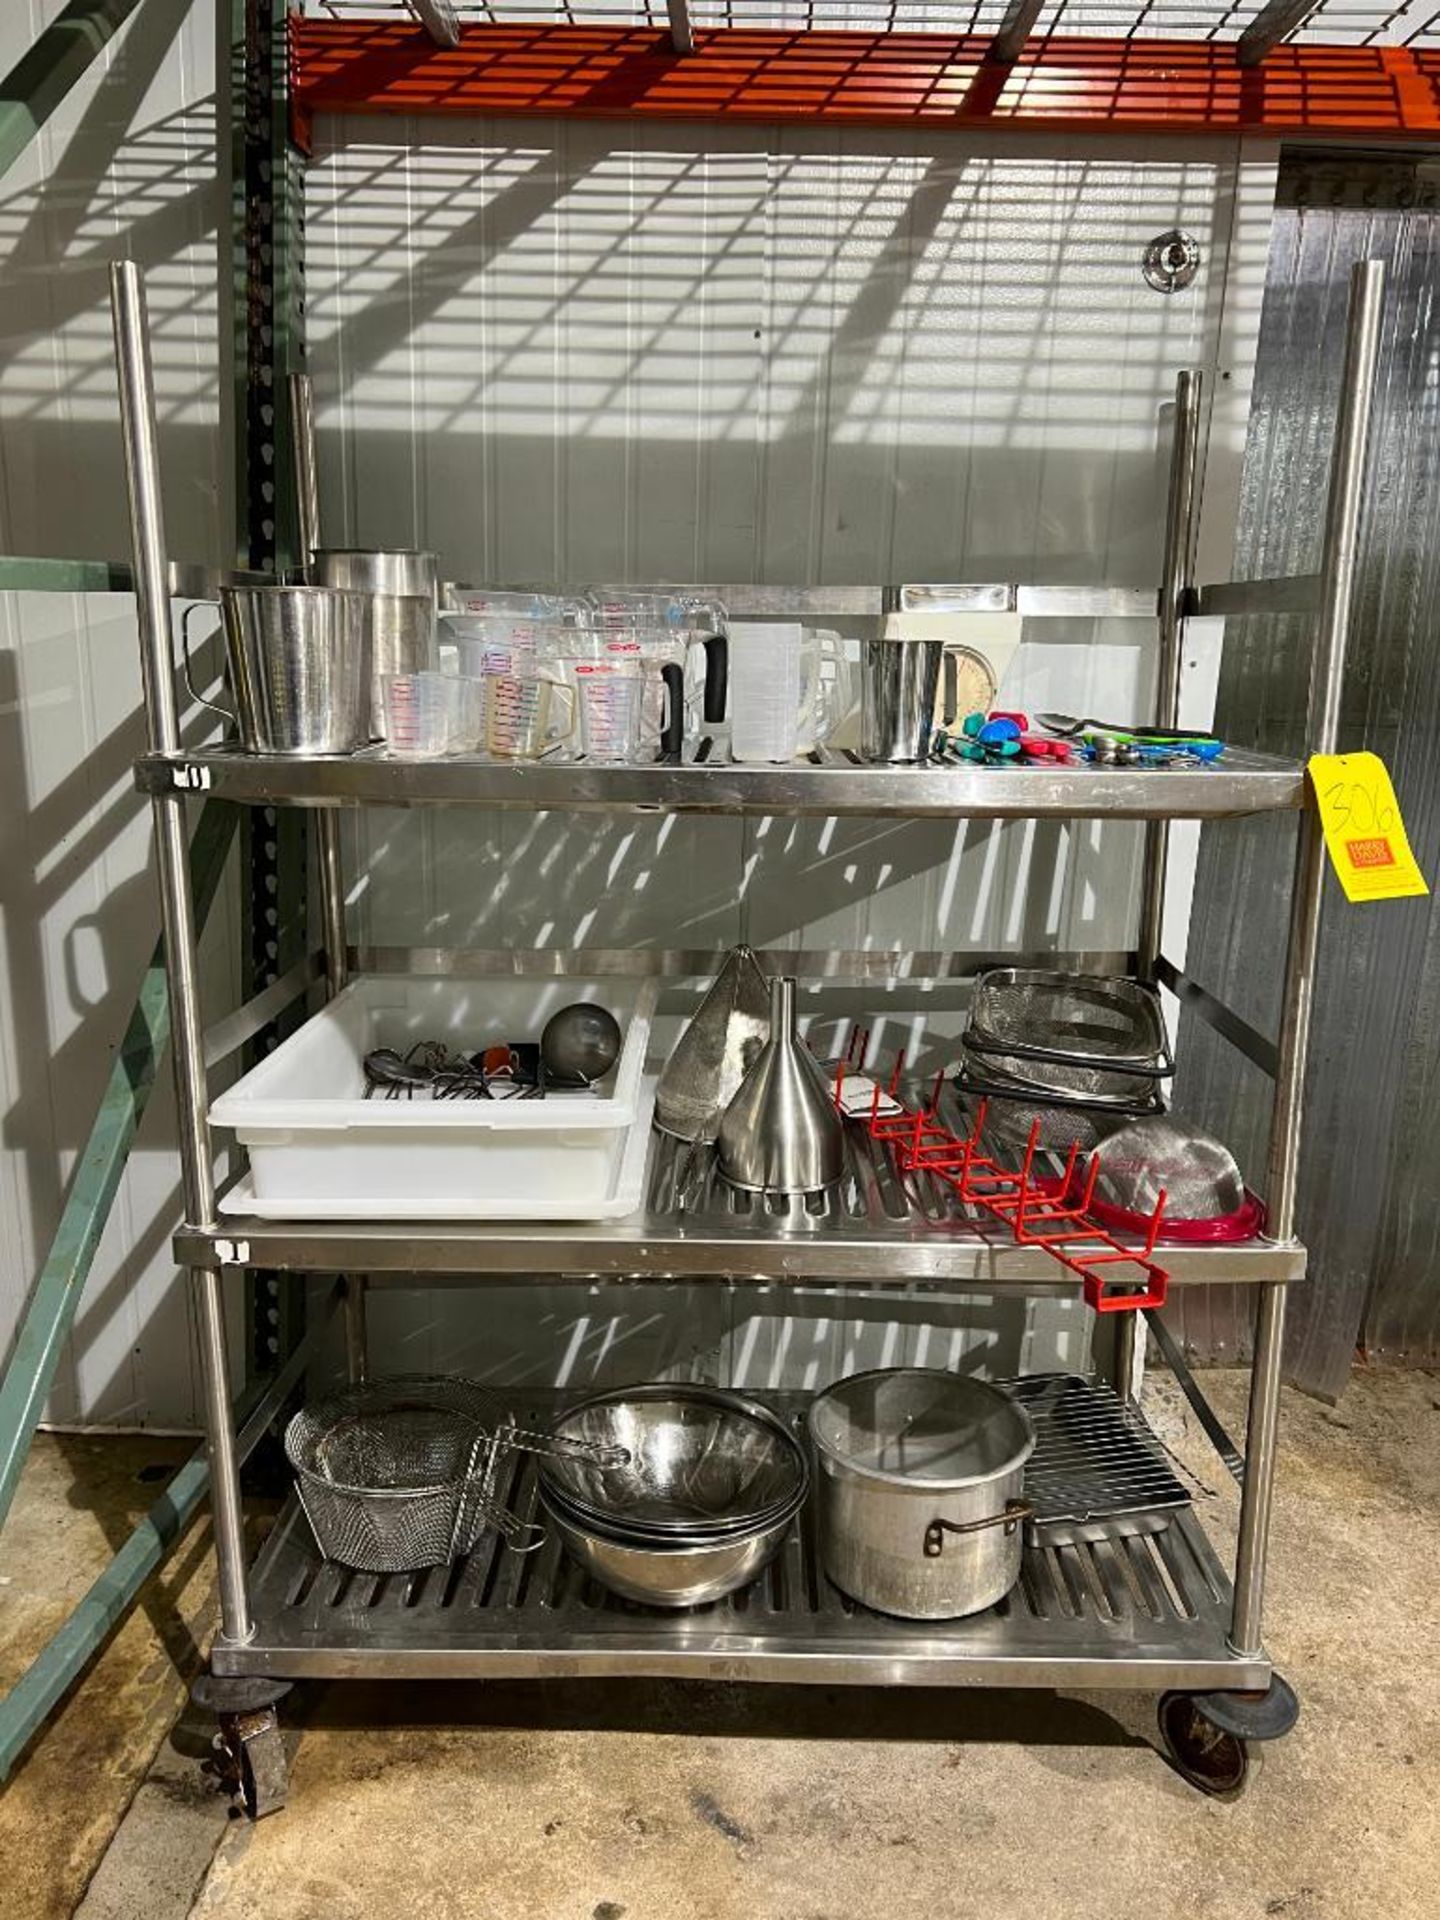 Assorted Measuring Cups (Some S/S), Bowls, Fryer Baskets, Chinoix, Scale, Utensils and Mobile 3-Shel